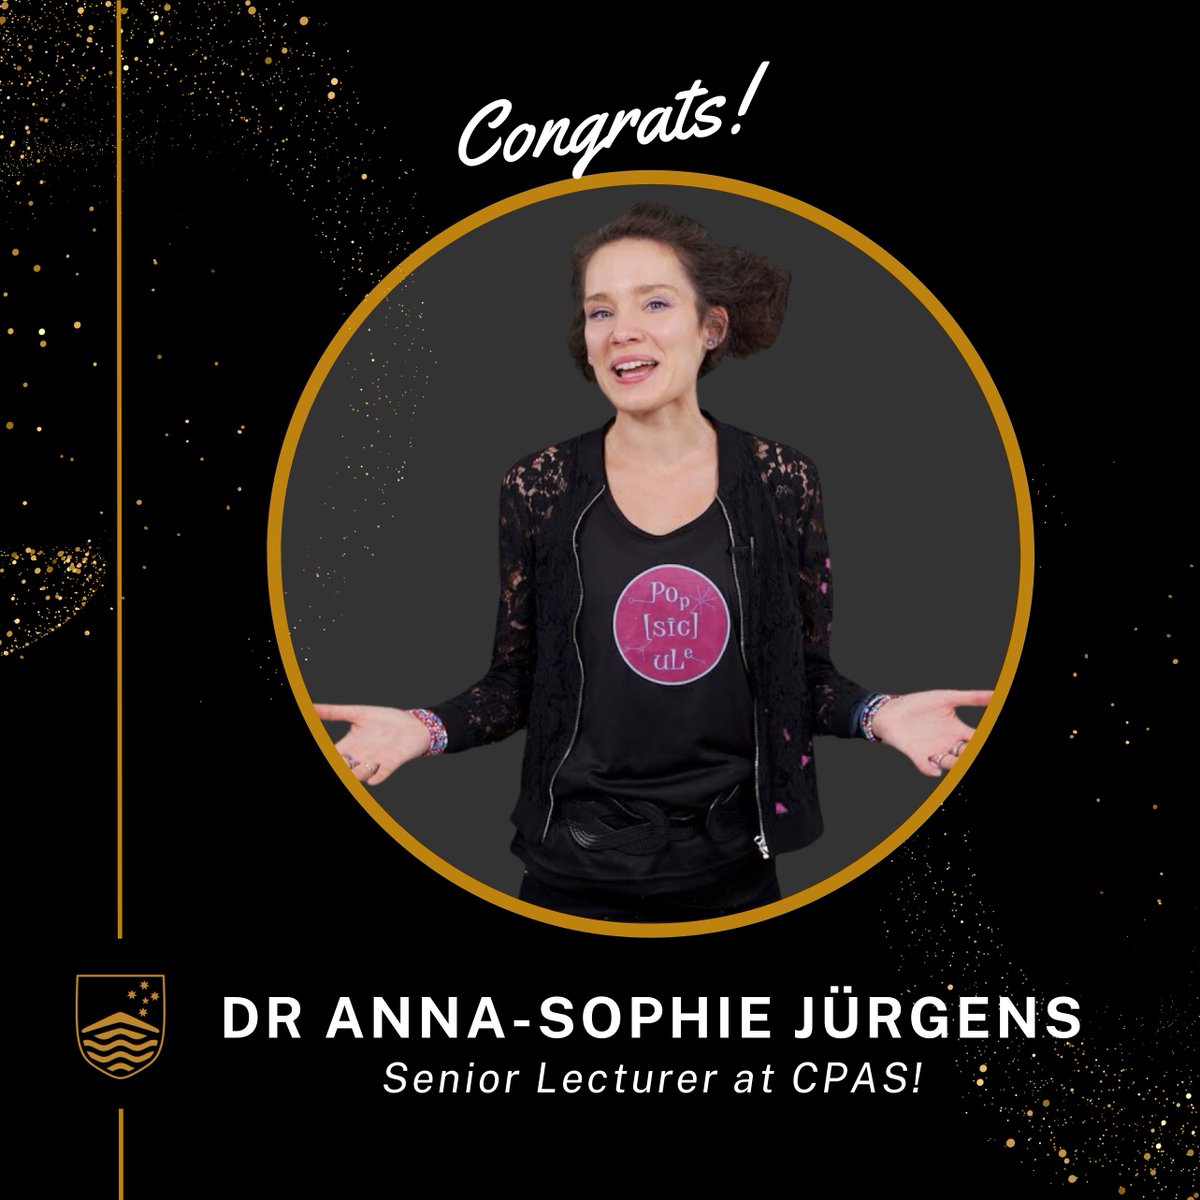 Starting in 2024, we congratulate recently promoted colleagues for their outstanding contributions to #education, #research, and #service. 

We want to give a special congrats Dr Jürgens on this much-deserved achievement! 

#ANUExpert @ourANU @AnnaSo_Jurgens @ANU_Popsicule